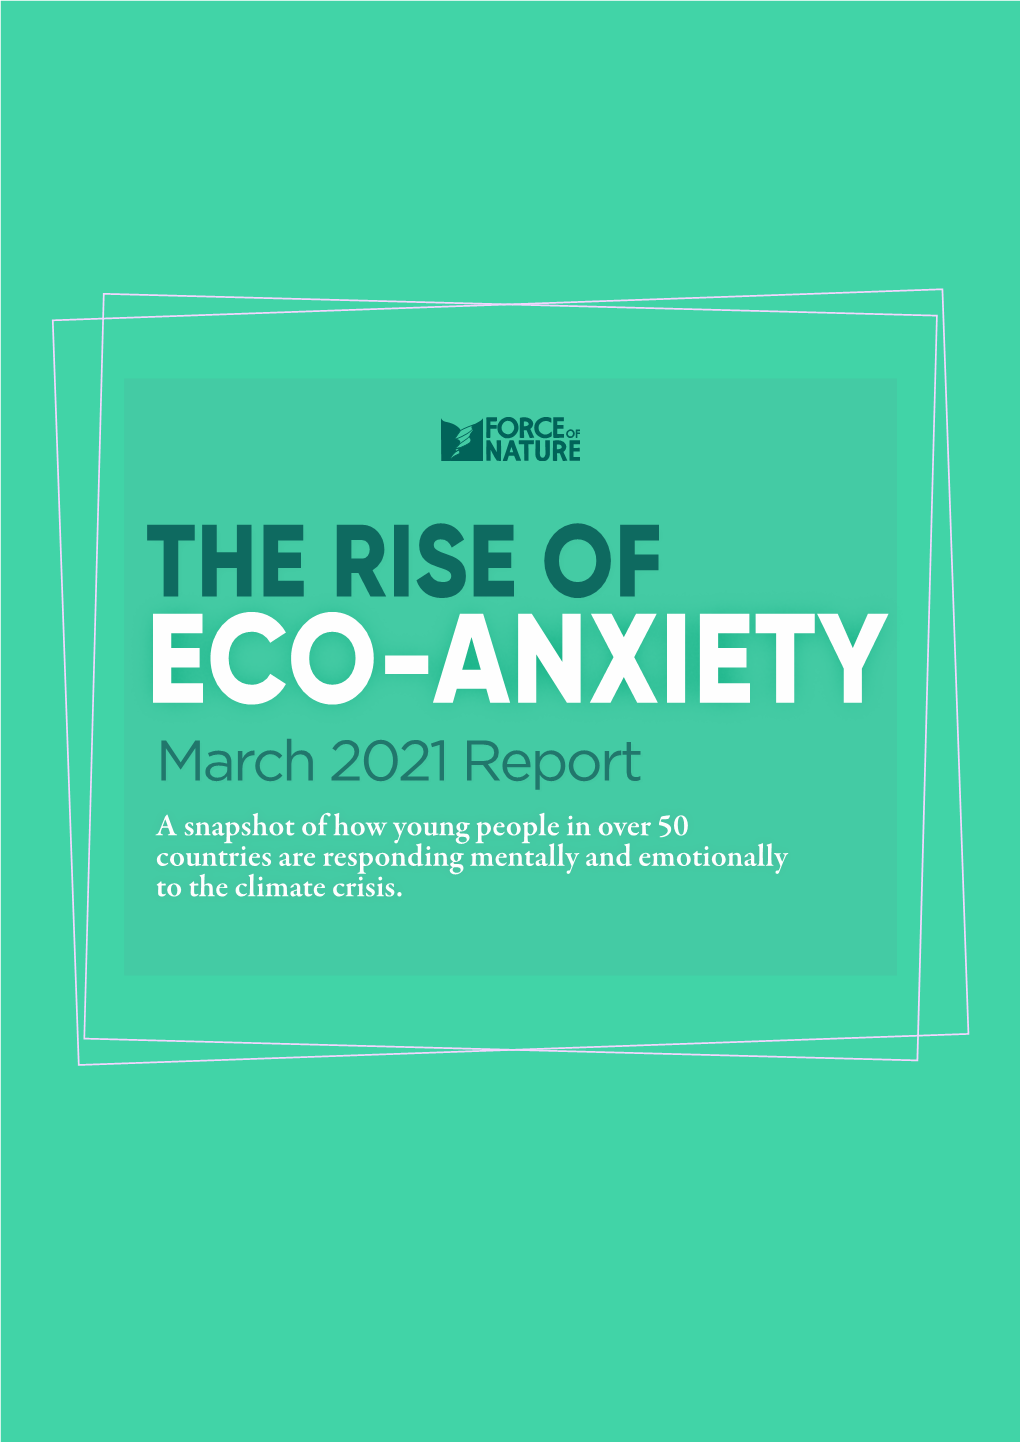 THE RISE of ECO-ANXIETY March 2021 Report a Snapshot of How Young People in Over 50 Countries Are Responding Mentally and Emotionally to the Climate Crisis